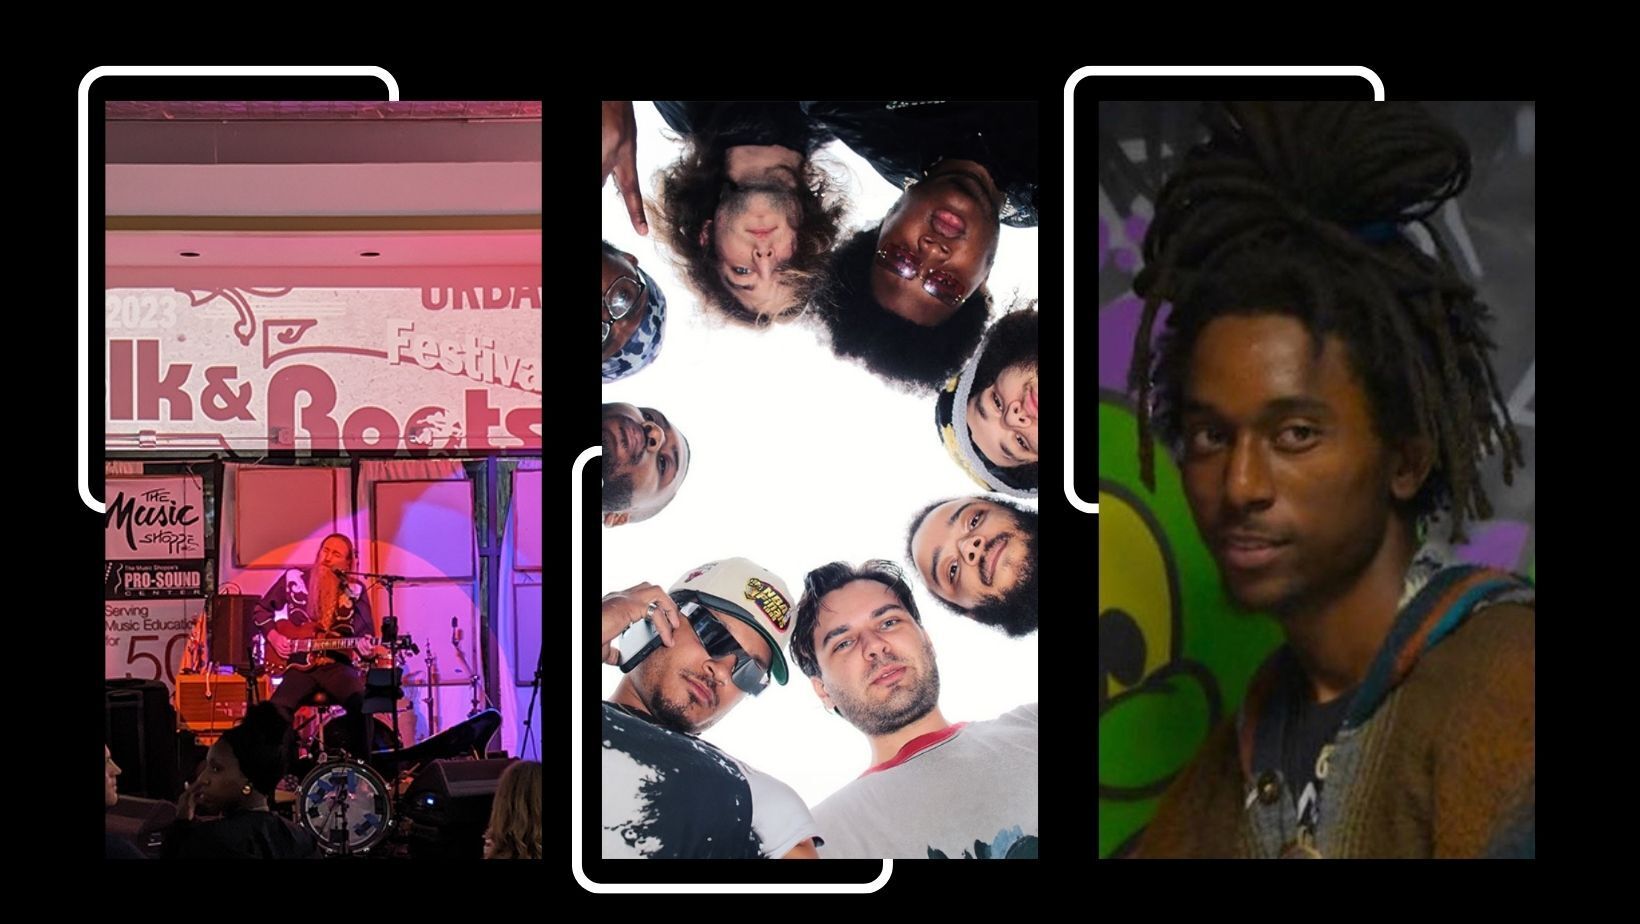 The collage consists of three photos. In the first, a musician strums a guitar on a stage, backdropped by pink and white hues. The second captures a group of individuals, some adorned with hats and scarves, forming a circle and peering downwards towards the camera. The third showcases an individual clad in a green jacket and a beanie, their dreadlocks visible.